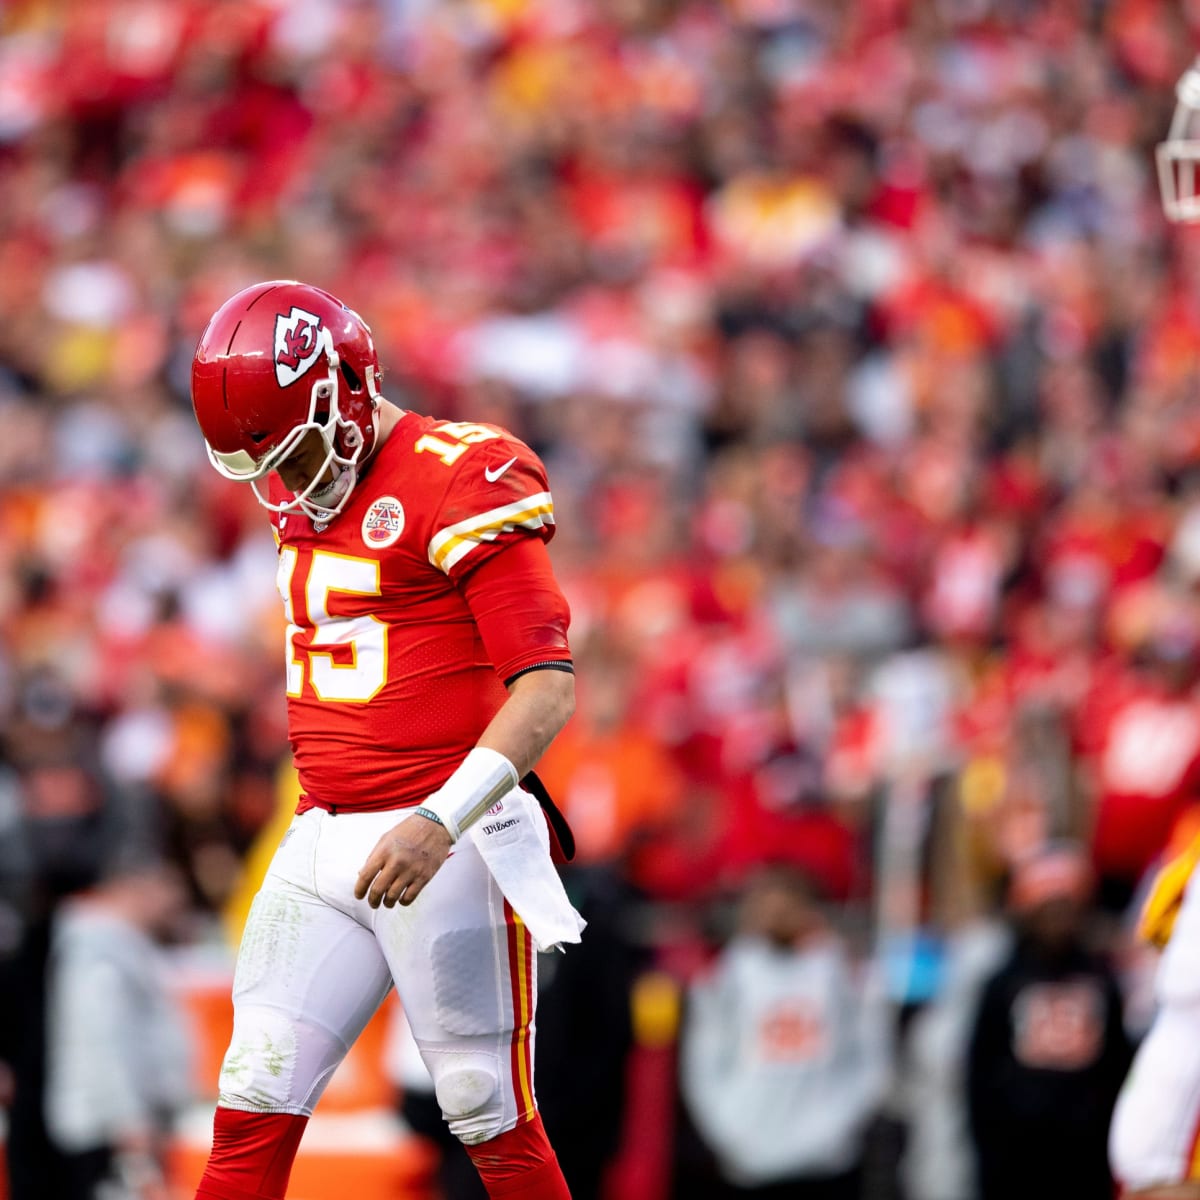 Chiefs look to avenge last season's losses to Bengals and maintain